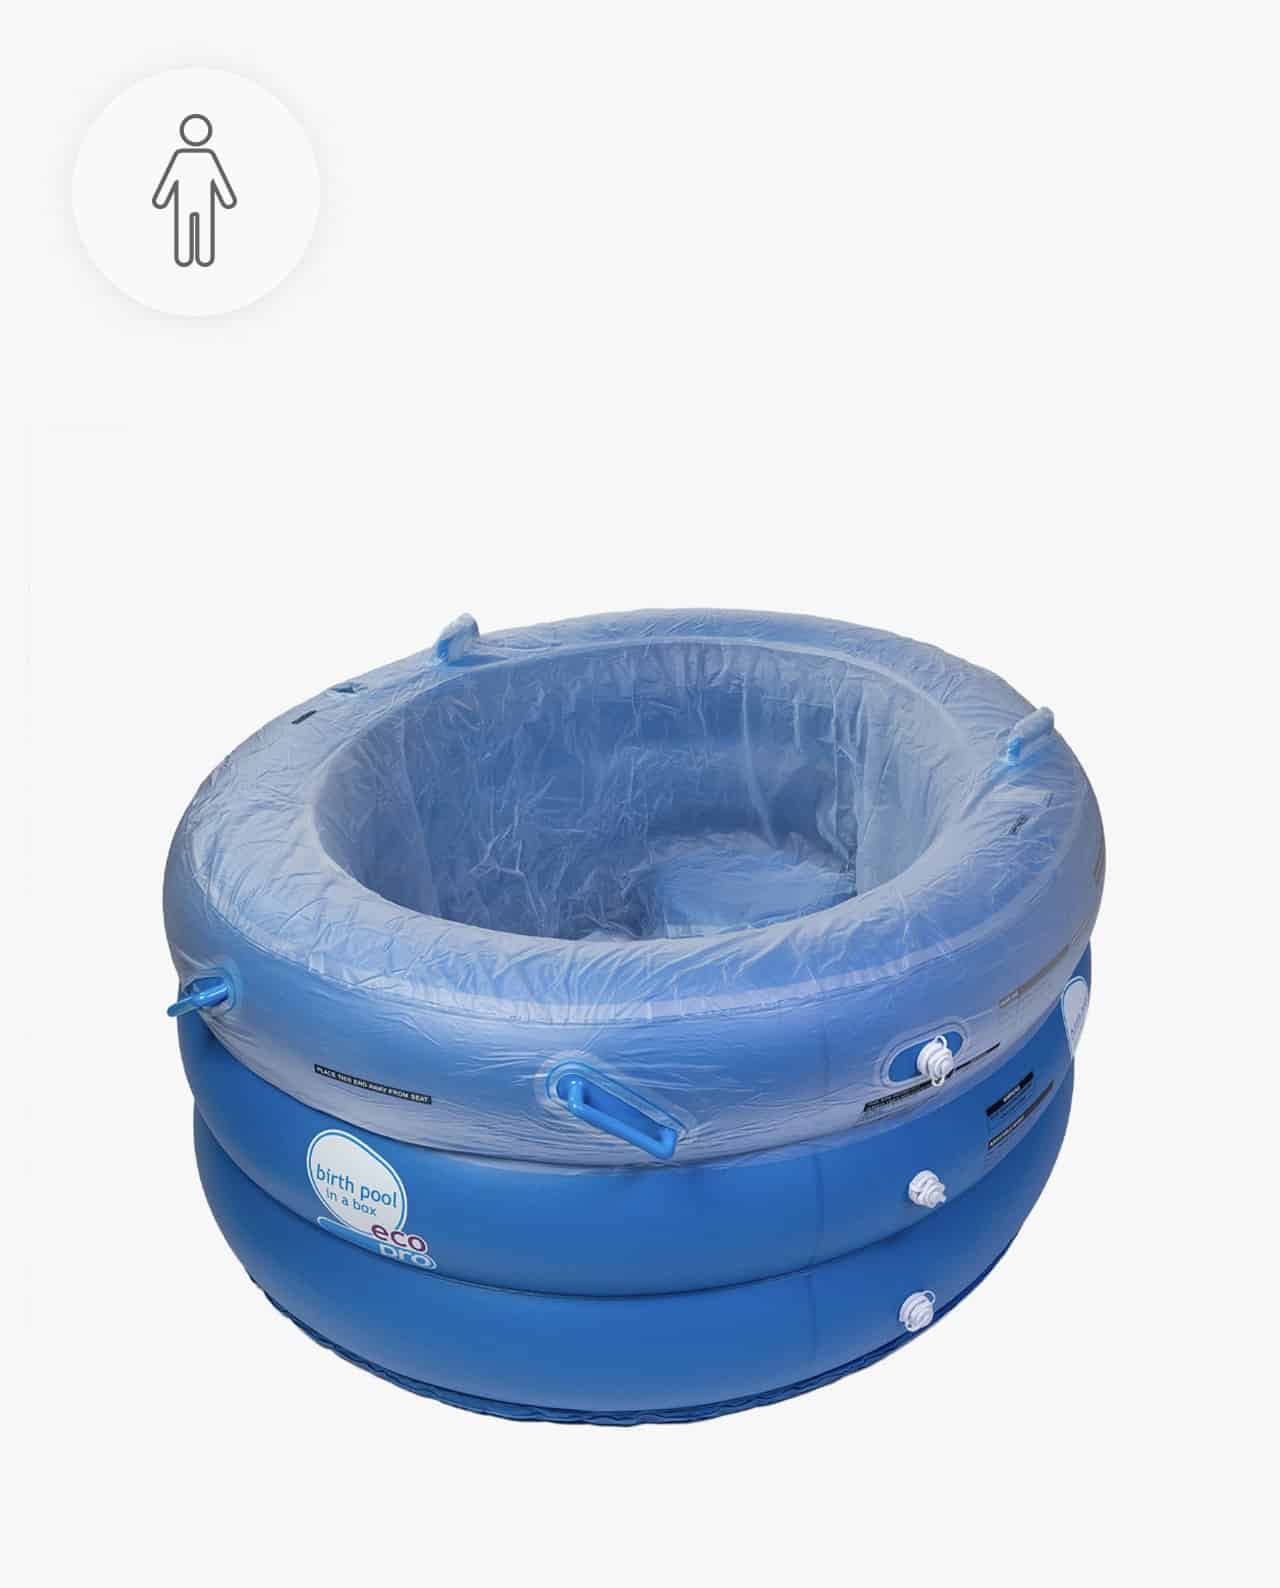 Birth Pool in a Box - Liners